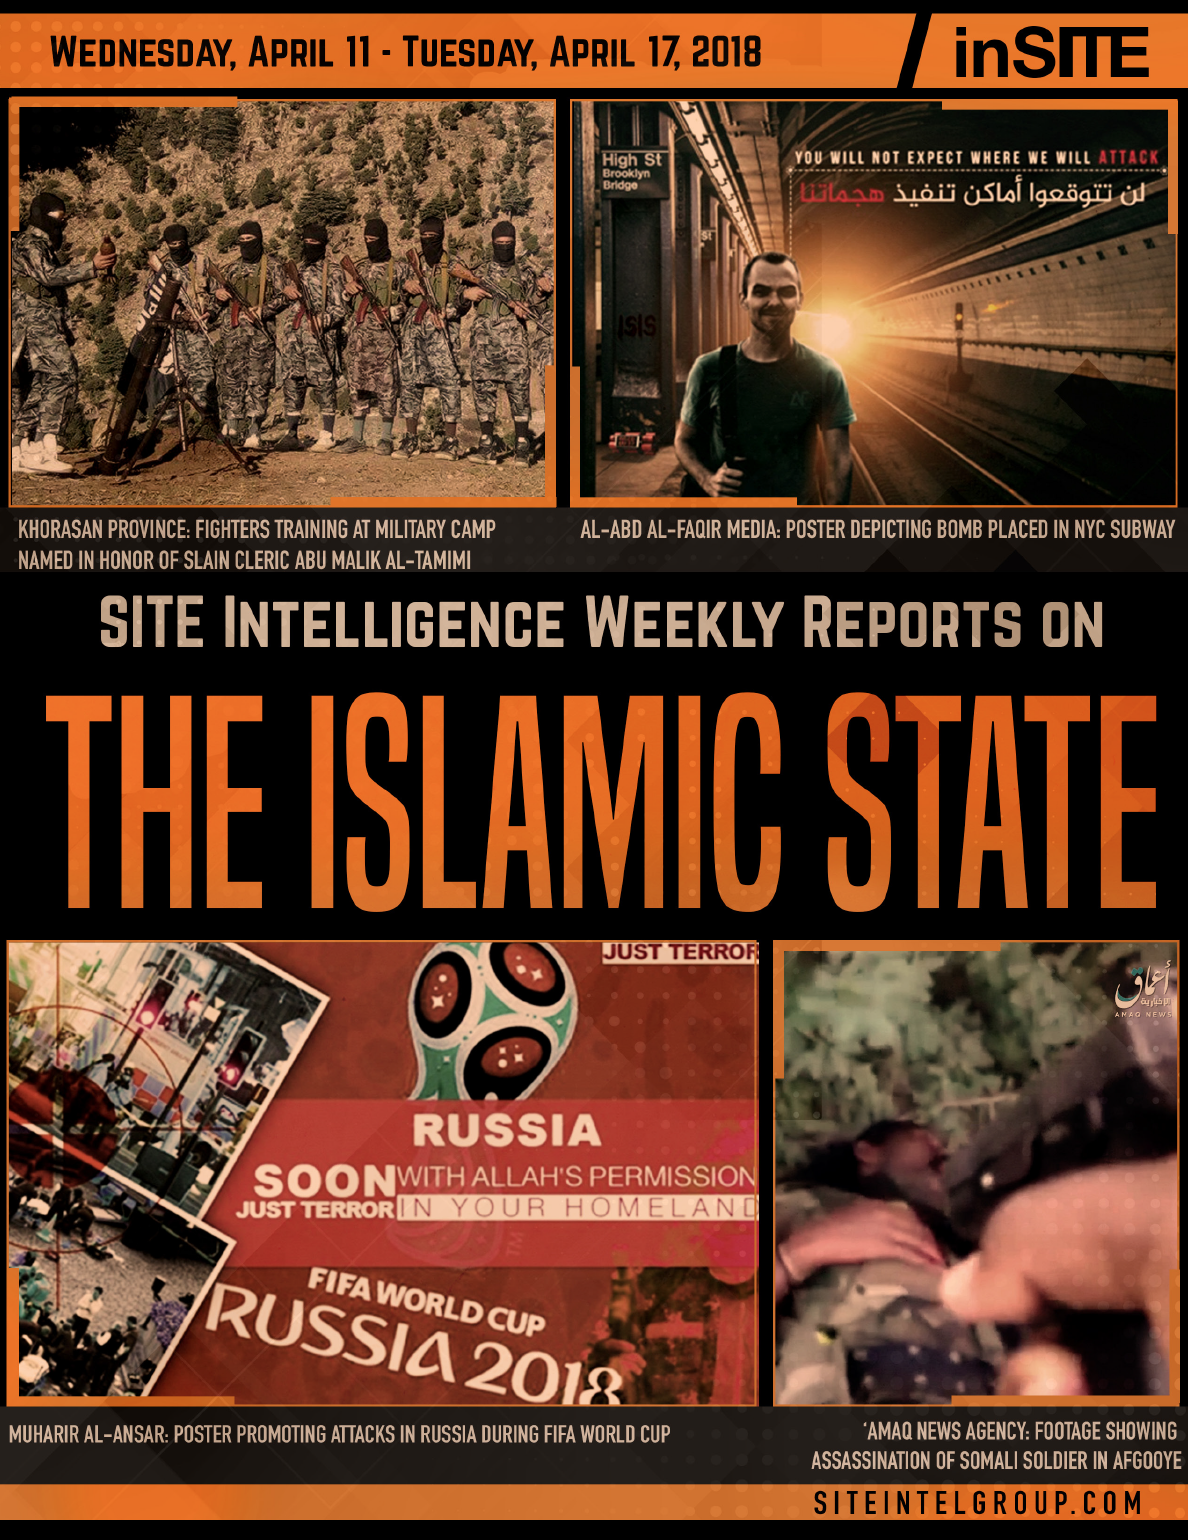 Weekly inSITE on the Islamic State for April 11-17, 2018